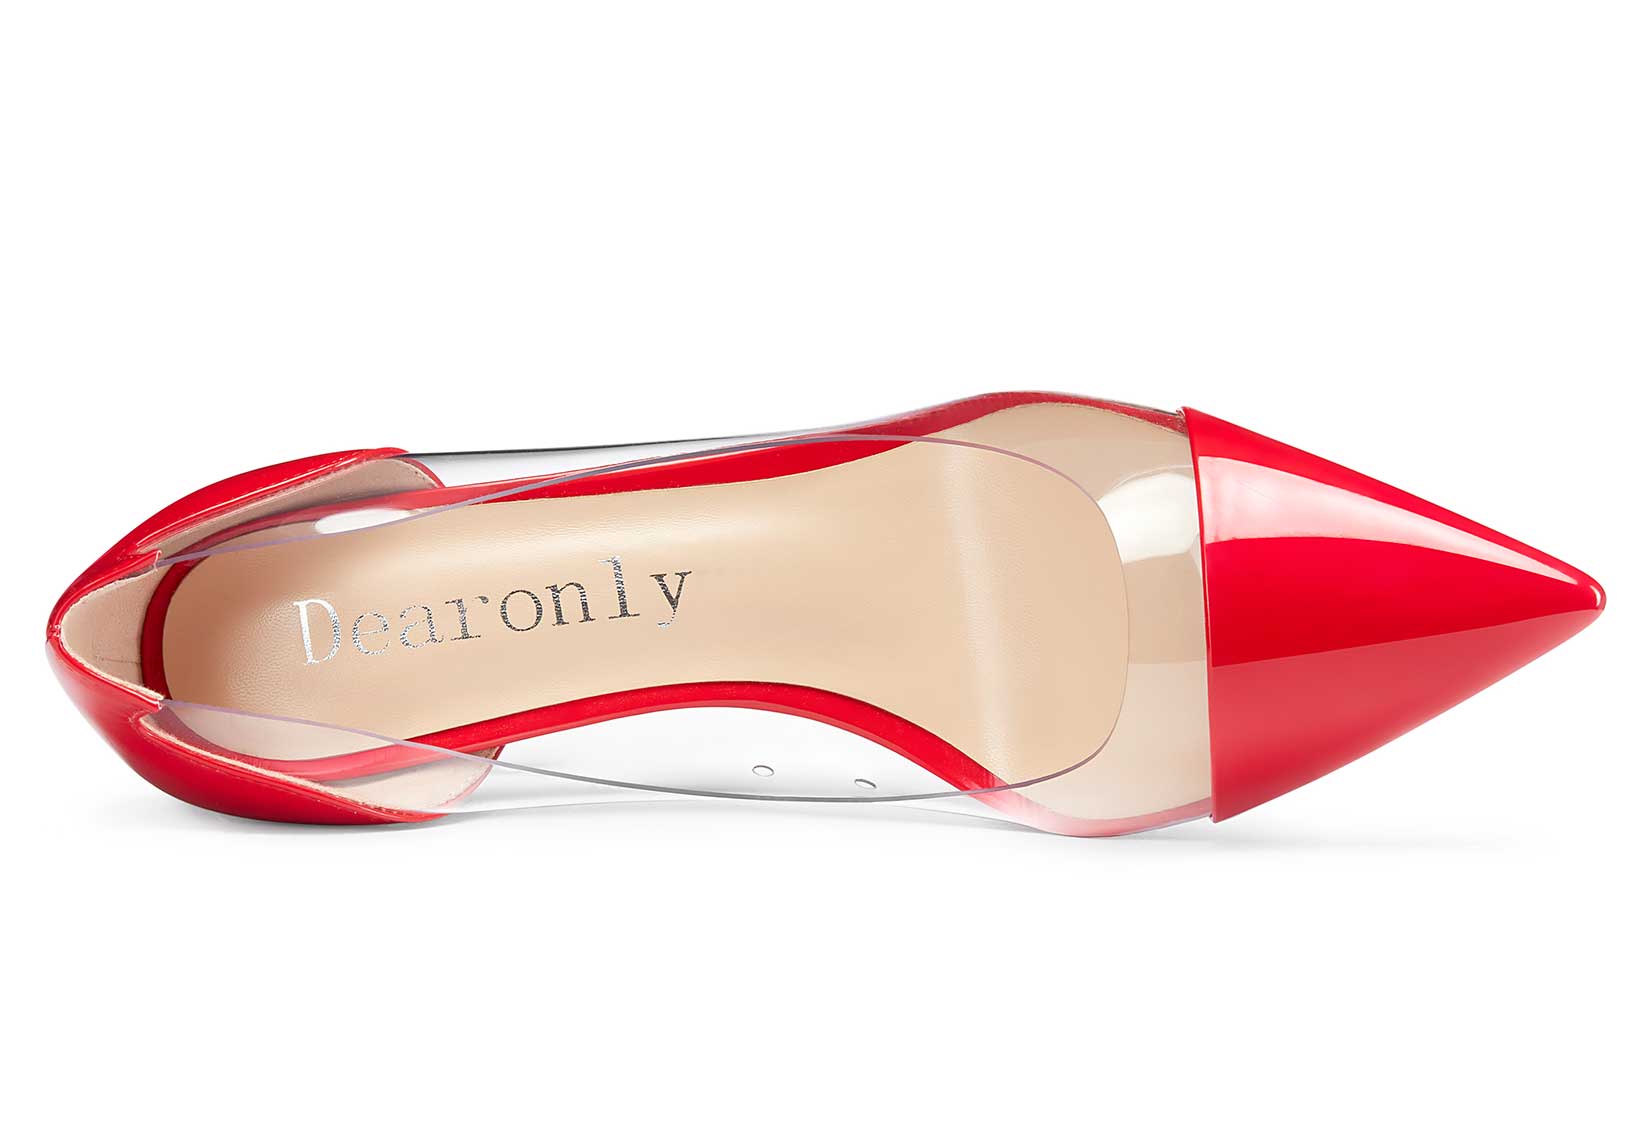 DearOnly Women's High Heels Transparent Clear Pumps Slip On Sexy Pointed Toe Stilettos 4" Inch Red Colorfull Patent Heel